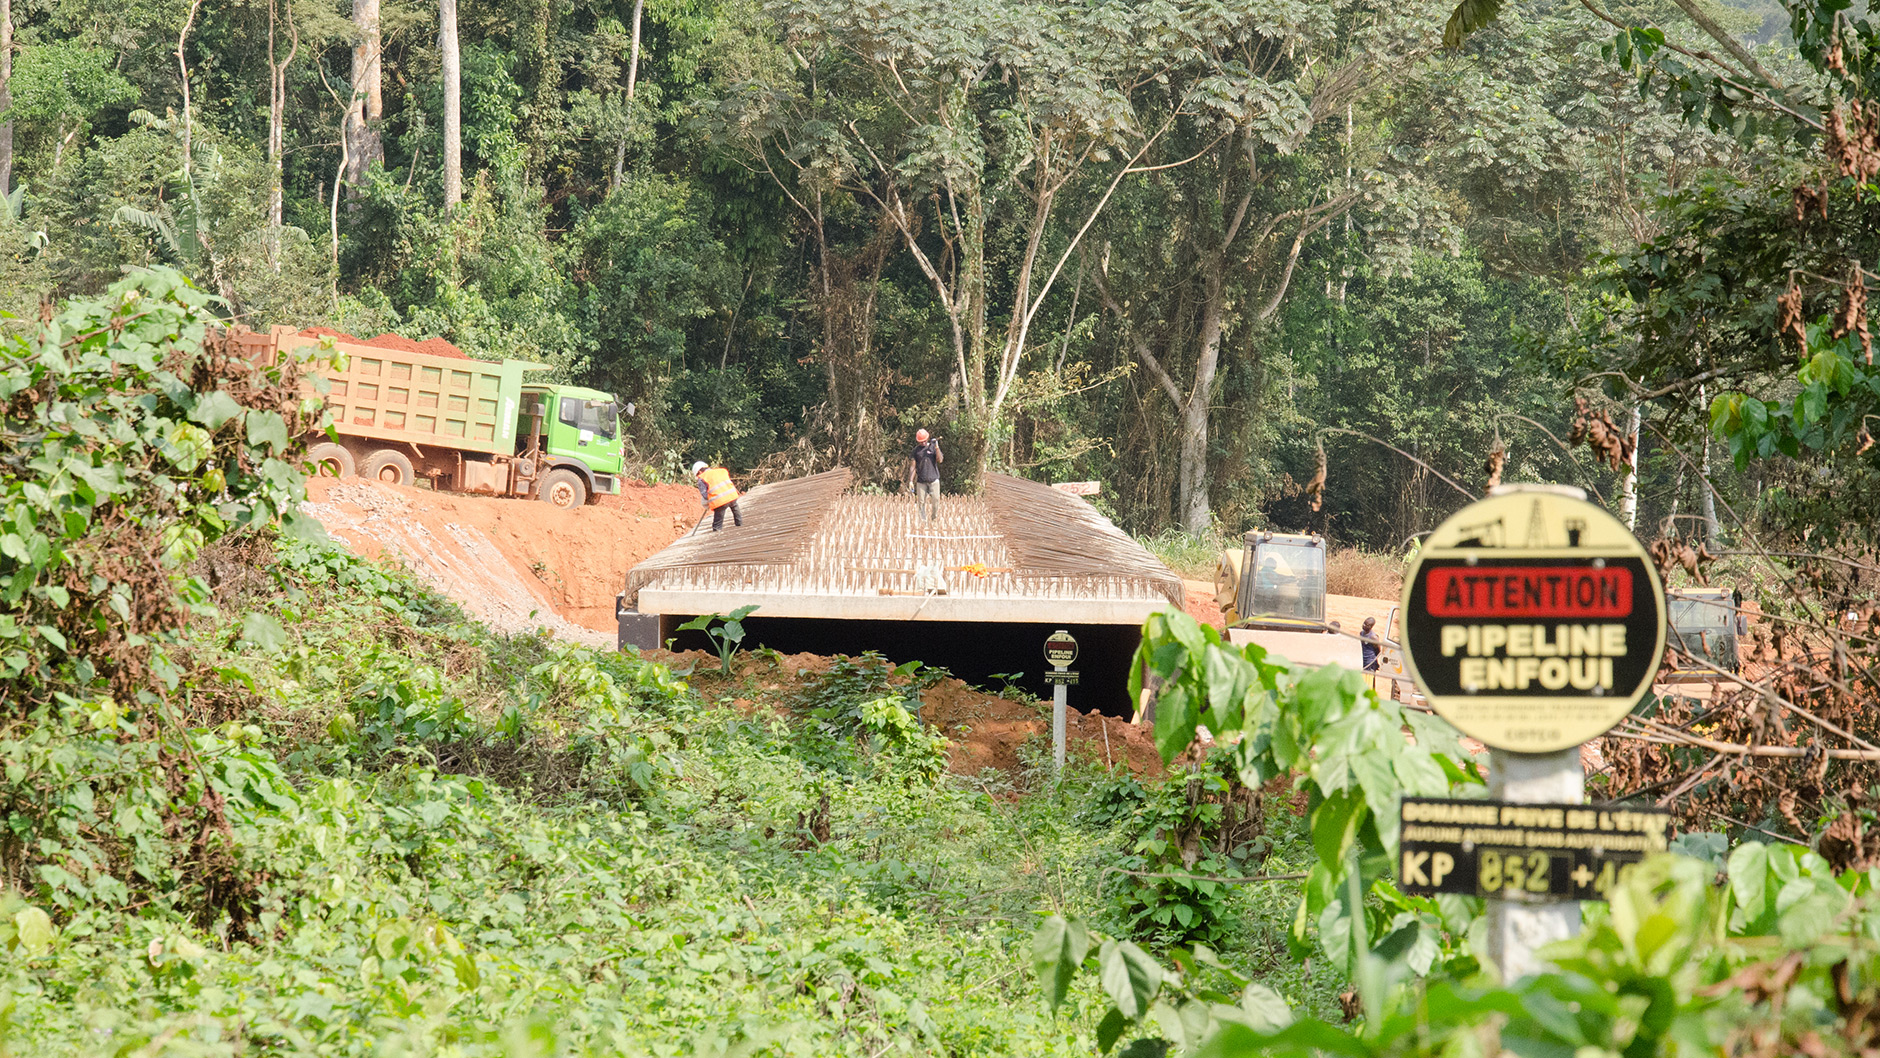 ​Cameroon highway construction project elevated for pipeline access